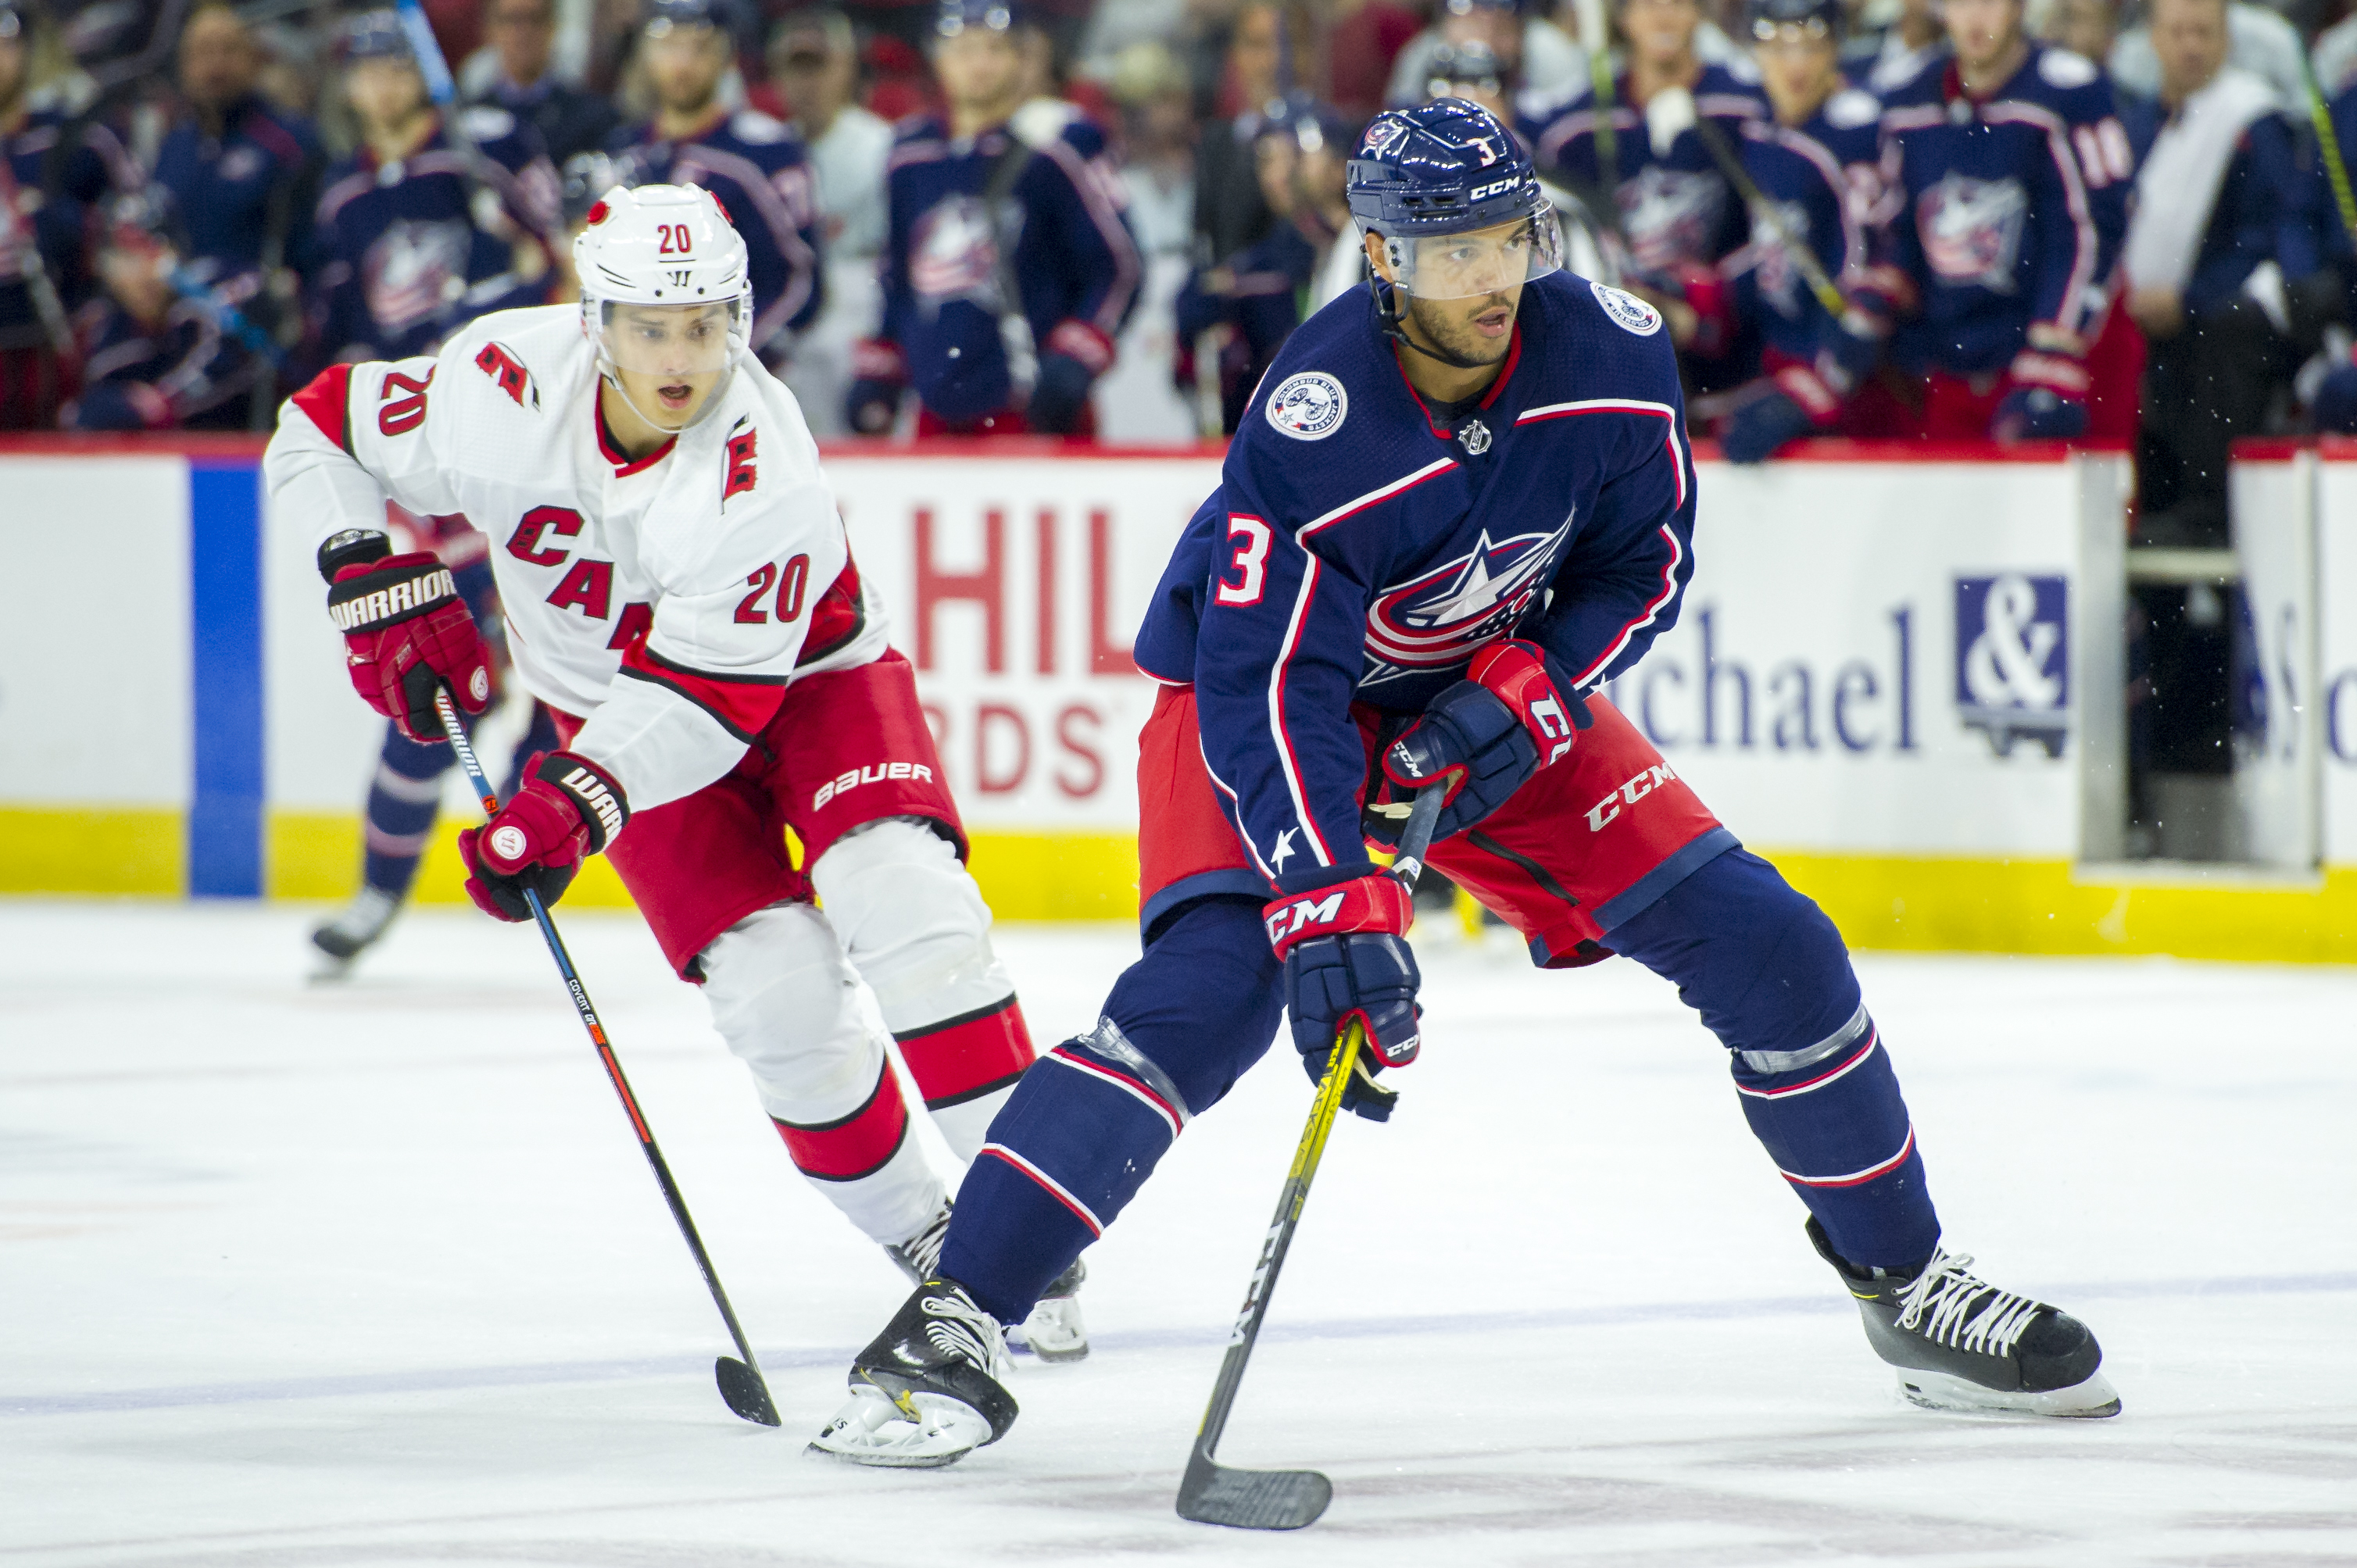 Can the Hurricanes and Blue Jackets Frustrate All The Way?